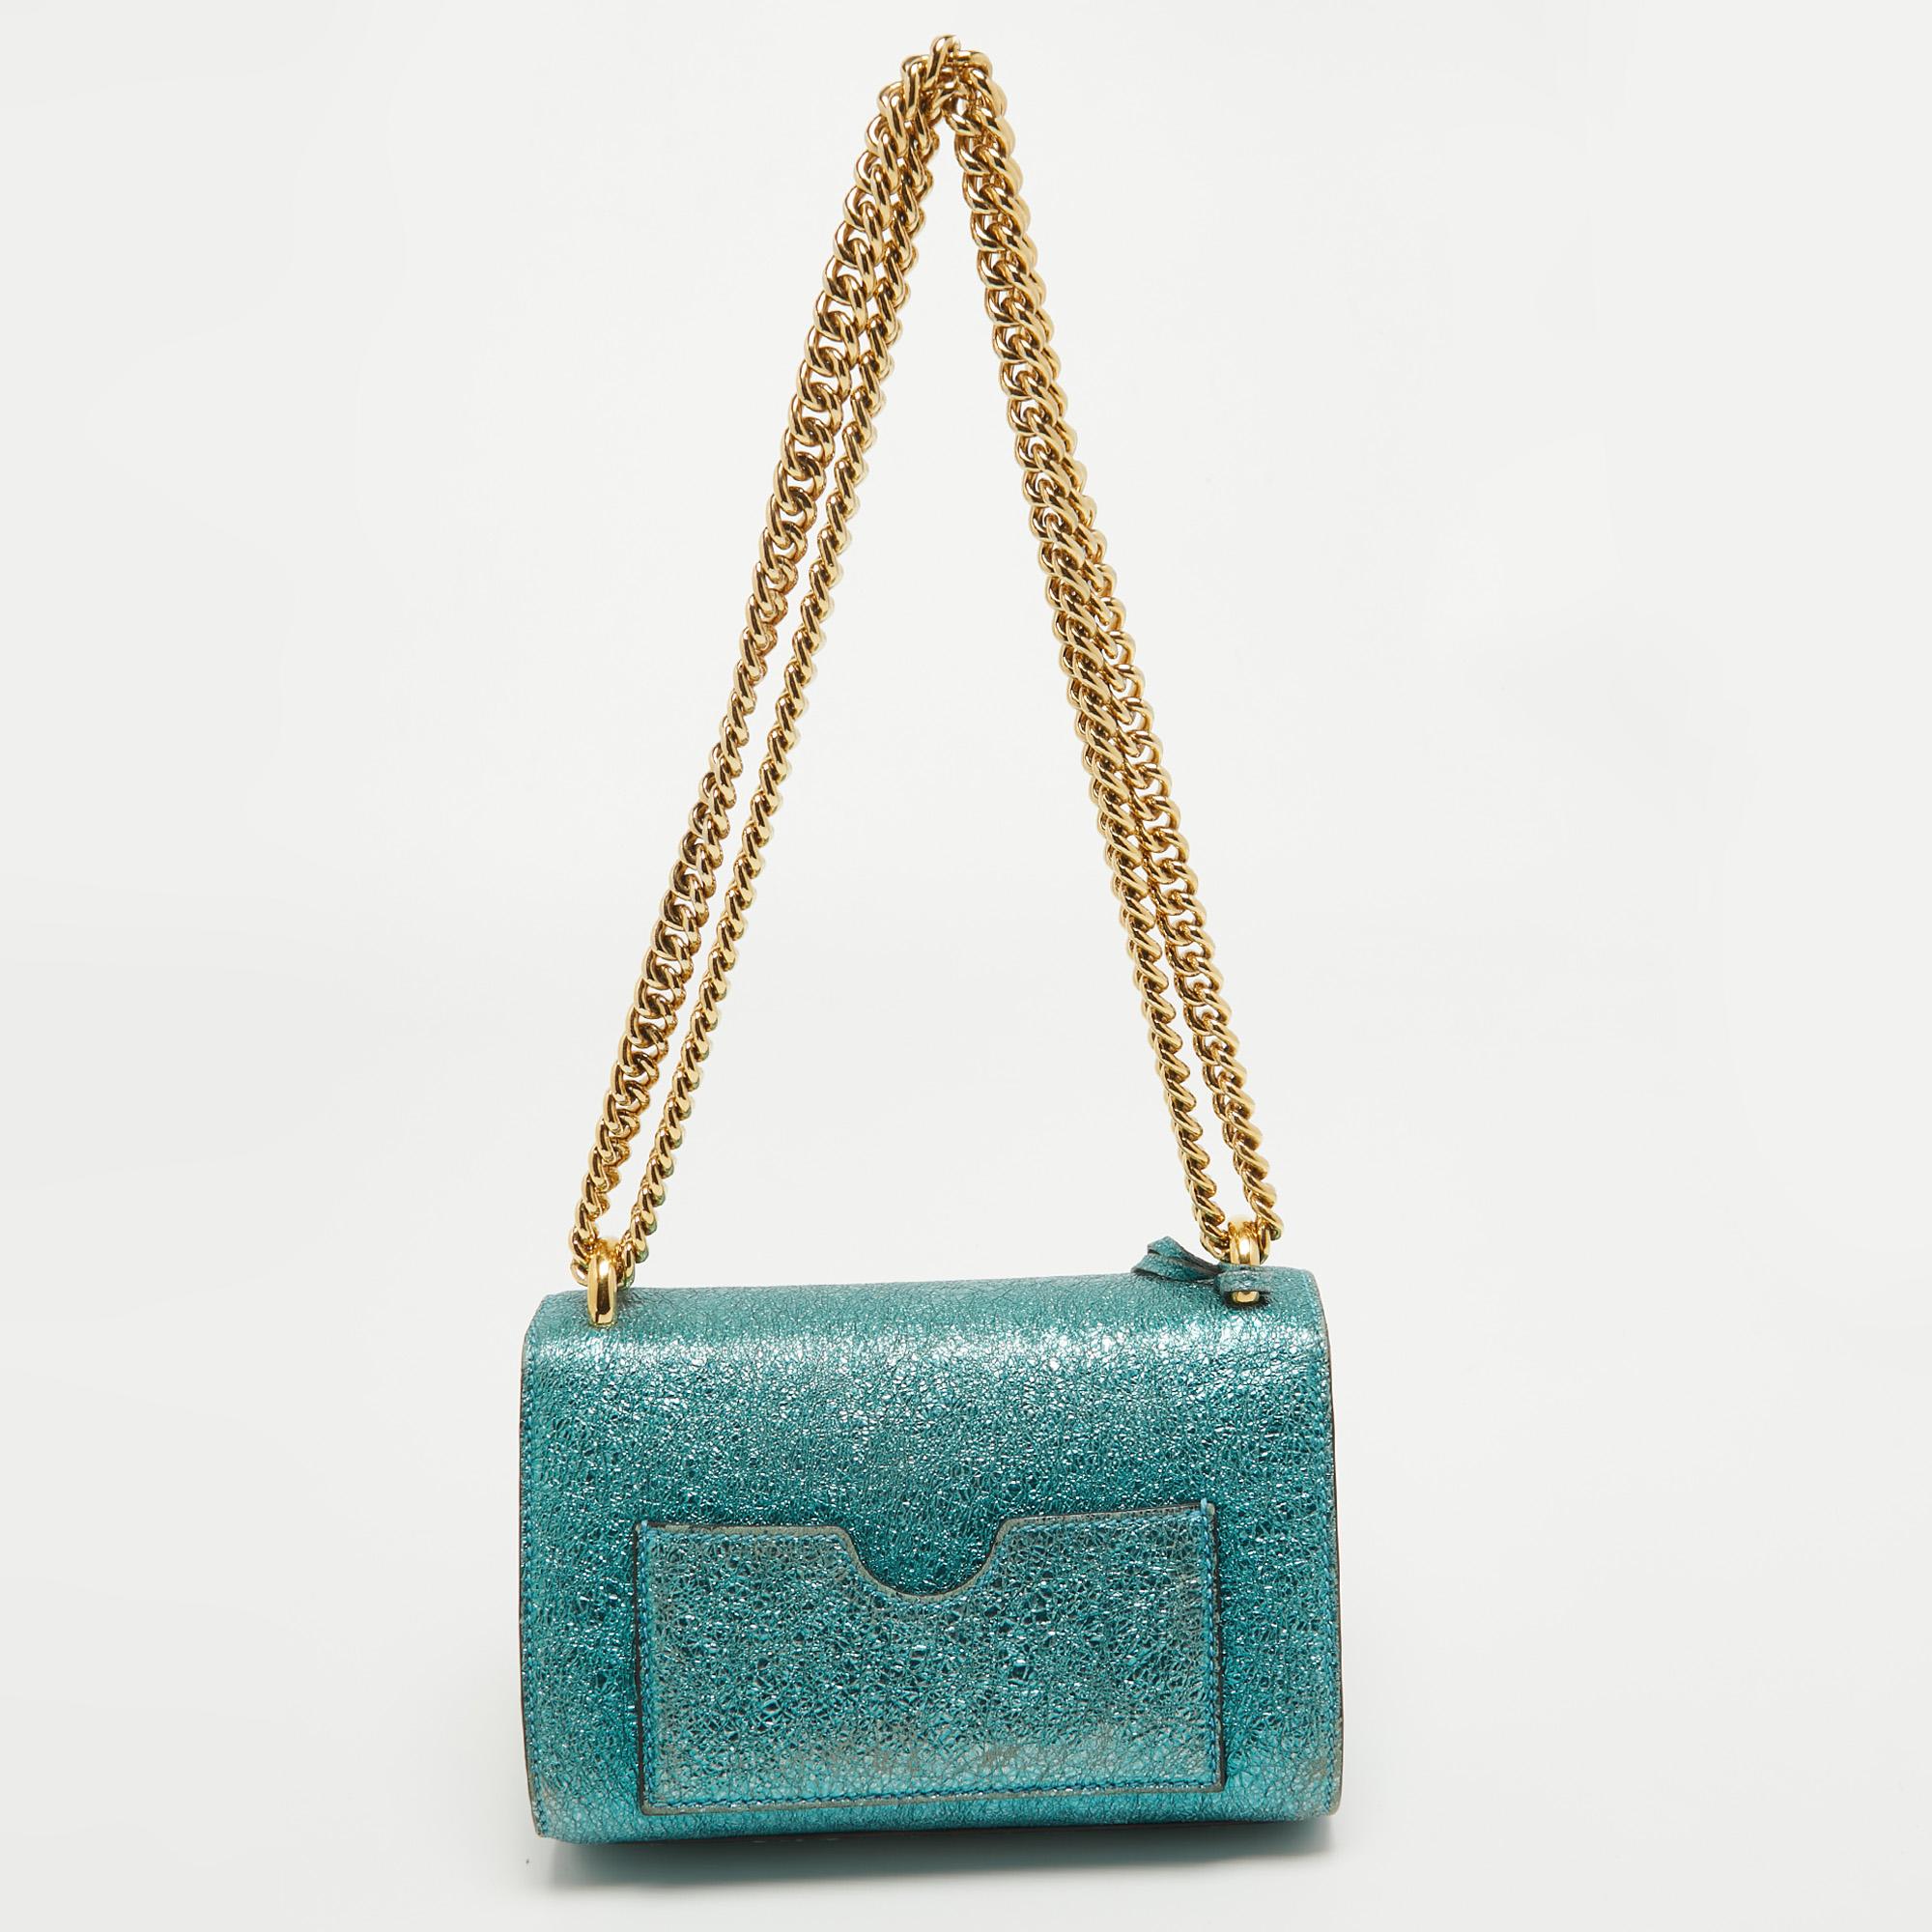 Thoughtful details, high quality, and everyday convenience mark this shoulder bag for women by Gucci. The bag is sewn with skill to deliver a refined look and an impeccable finish.

Includes: Original Dustbag, Keys

